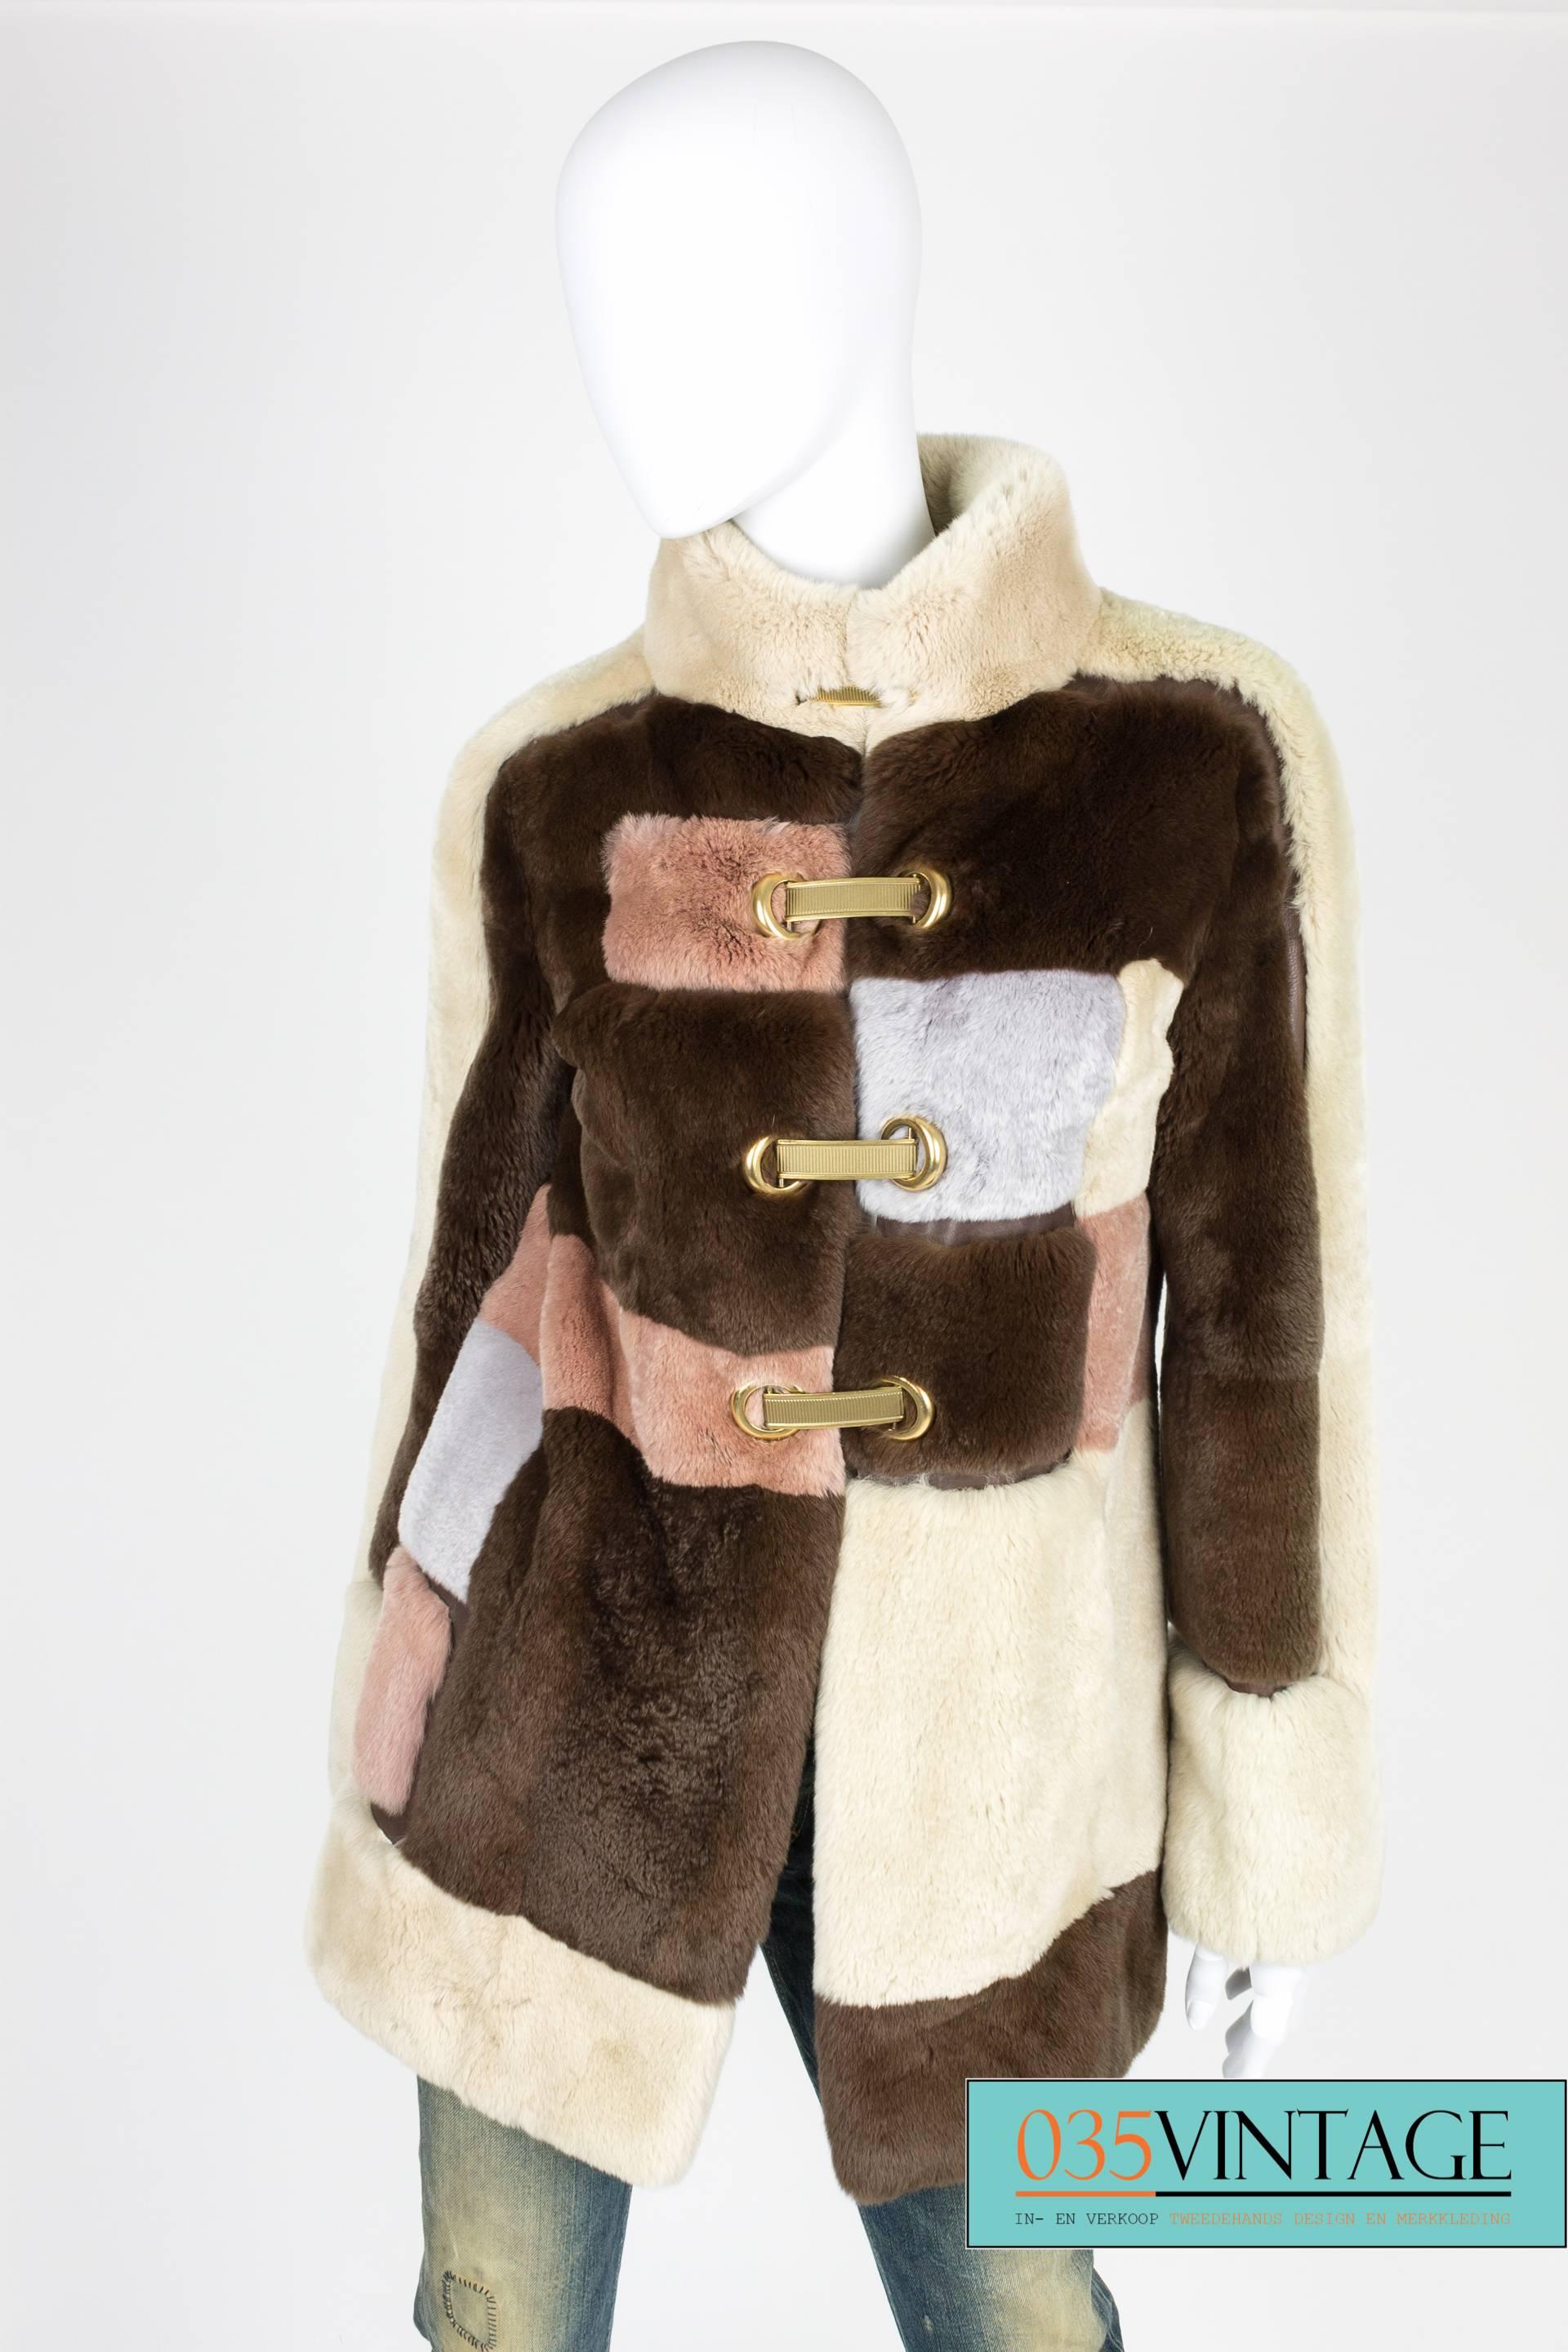 Supple and light fur coat with leather detailing by Emilio Pucci in a beautiful square pattern.

The squares are dark brown, beige, gray and pale pink. In between the squares you will find dark brown leather parts. Mandarin collar and welt pockets.